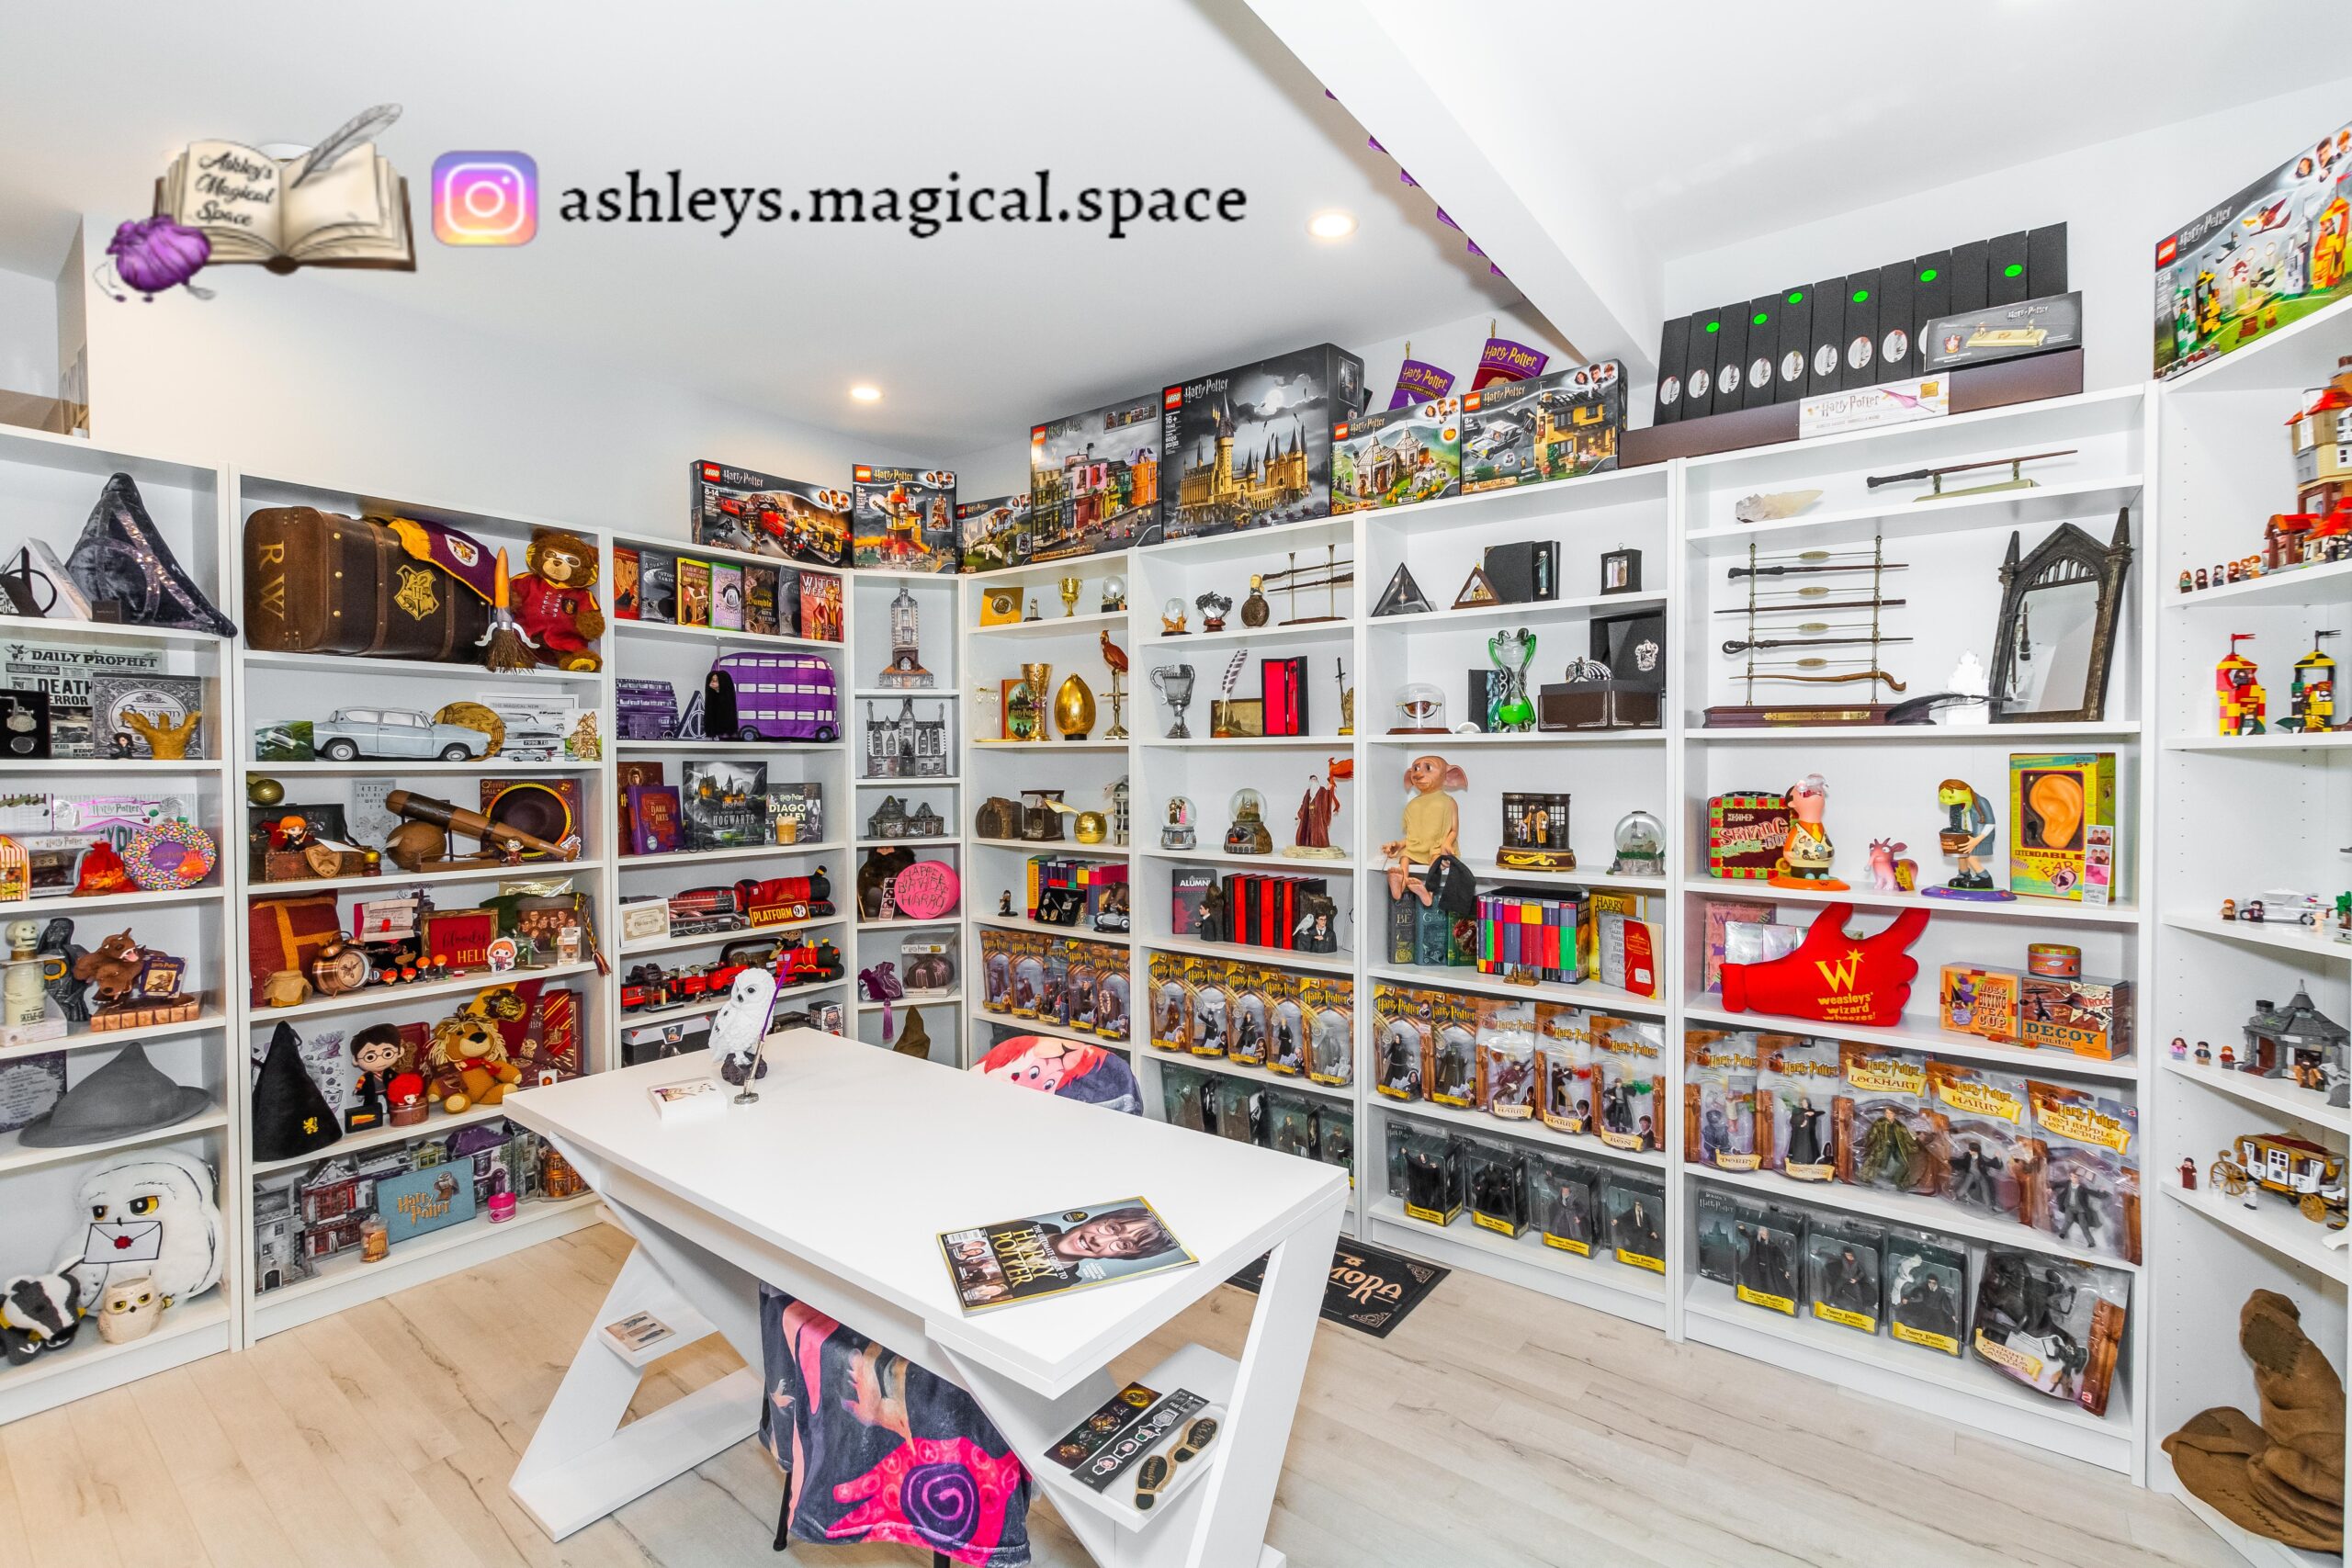 Ashley’s magical “Harry Potter” space is filled with merchandise and Gryffindor spirit.